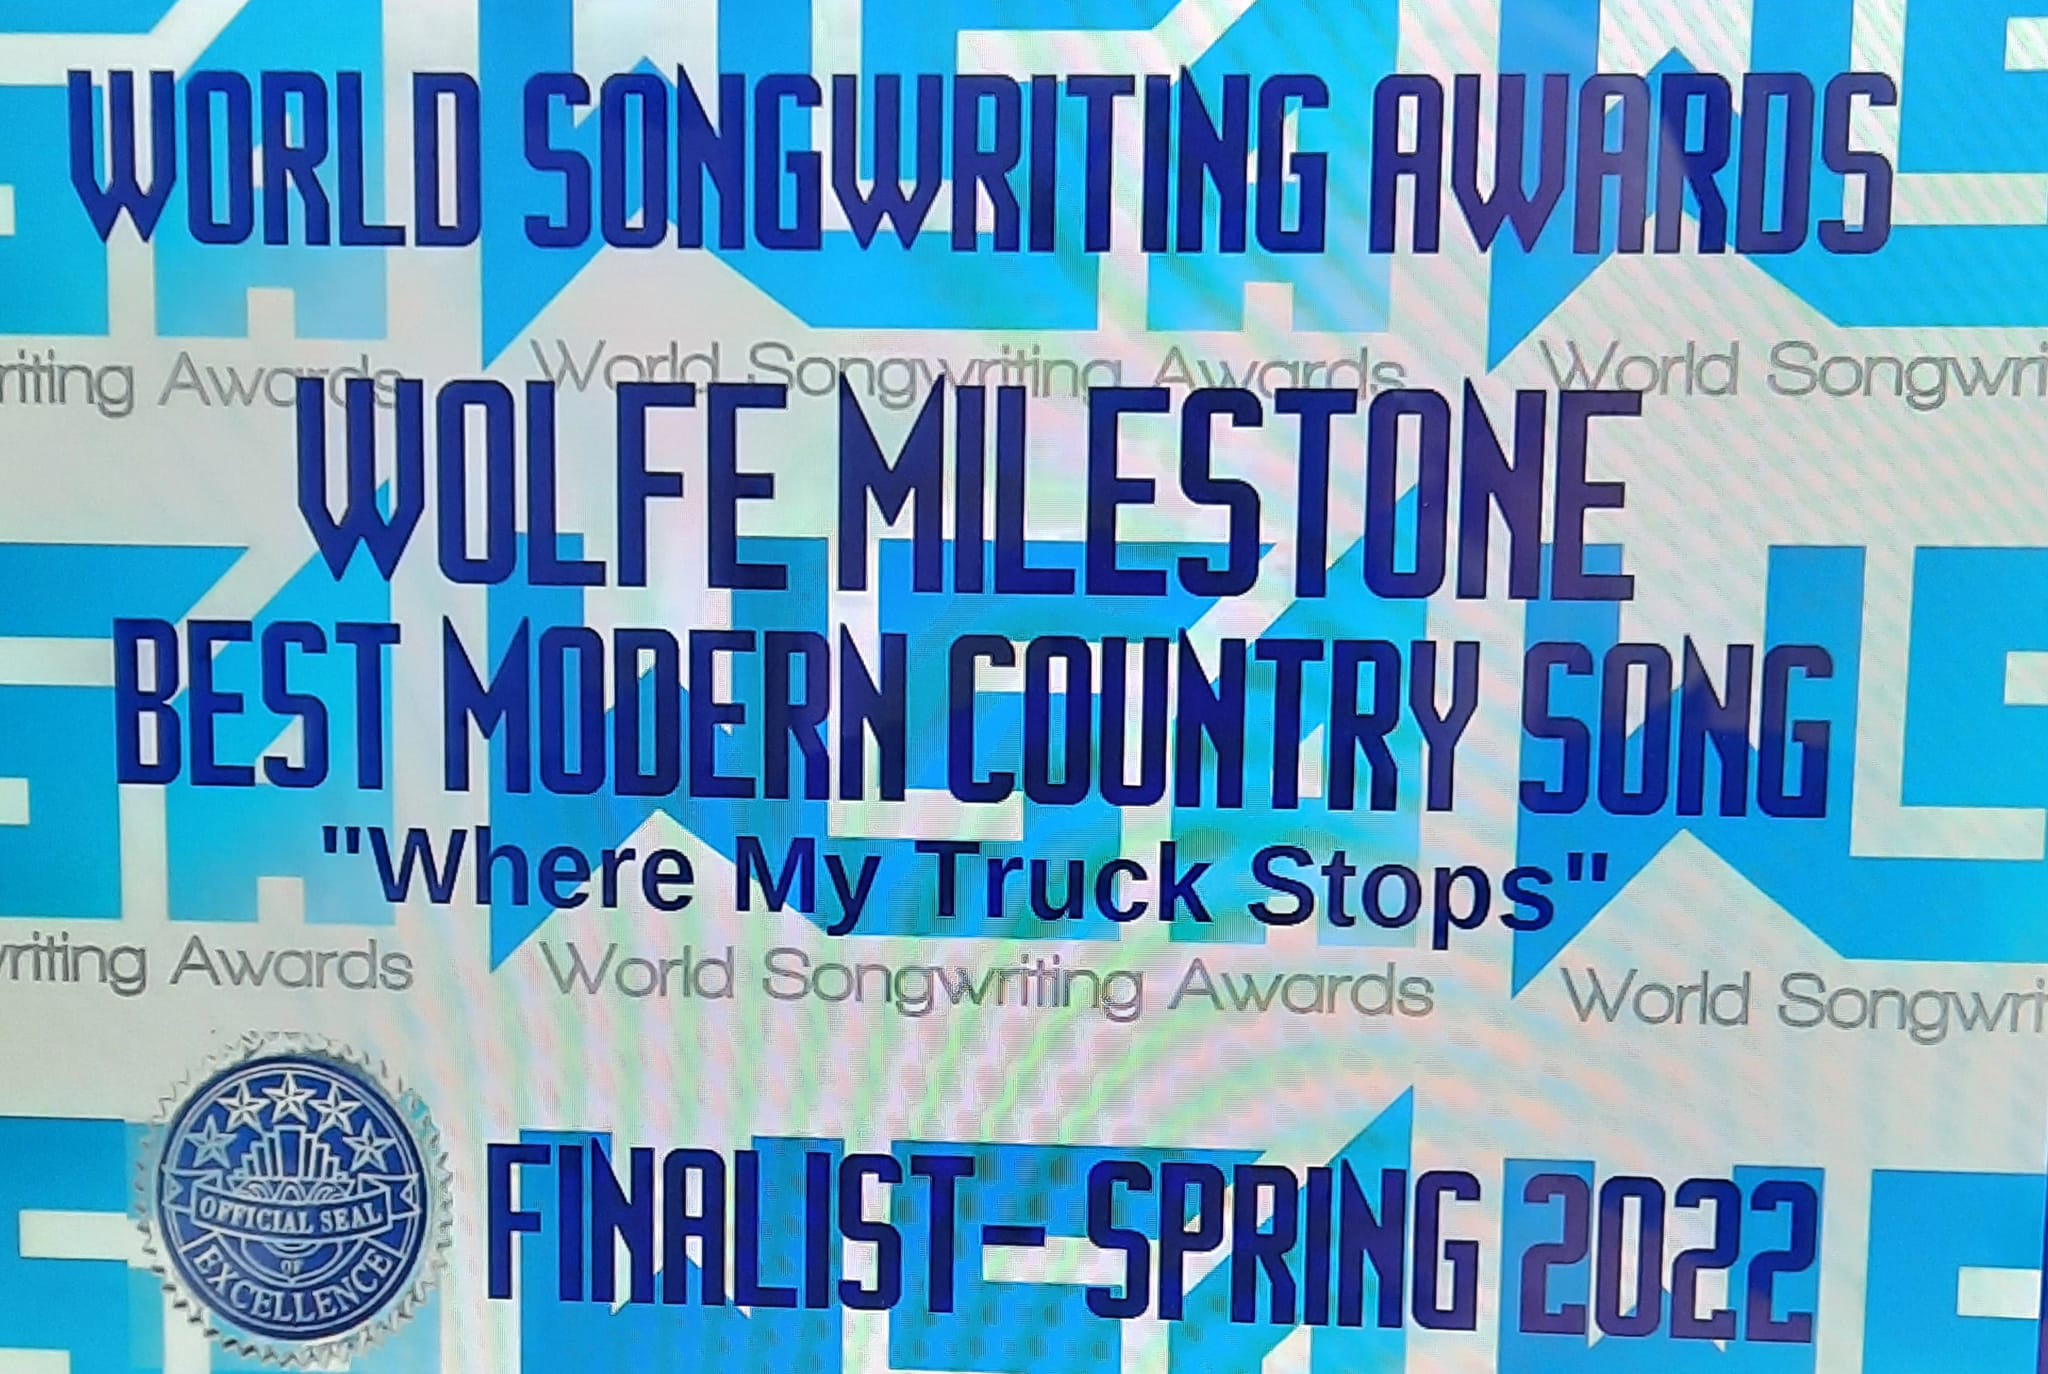 World Songwriting Awards - Best Modern Country Song - Wolfe Milestone 'Where My Truck Stops' - Best Modern Country Song - Finalist Spring 2022